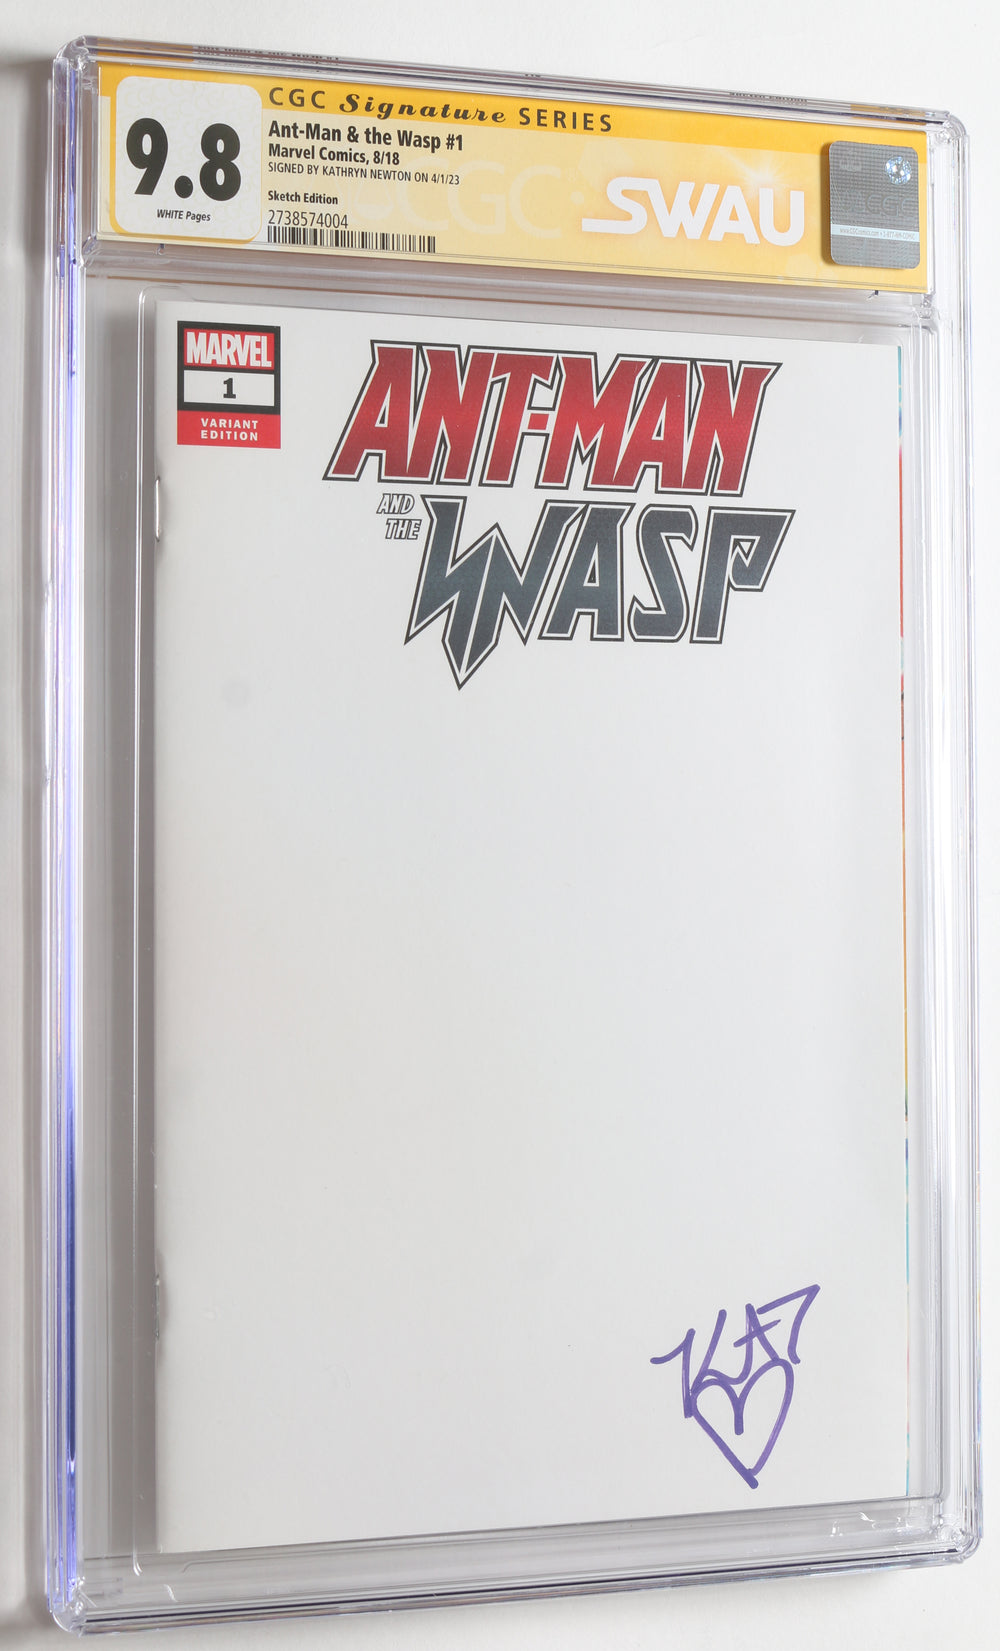 Ant-Man & the Wasp #1 - Signed by Kathryn Newton (SWAU CGC Signature Series 9.8) 2018